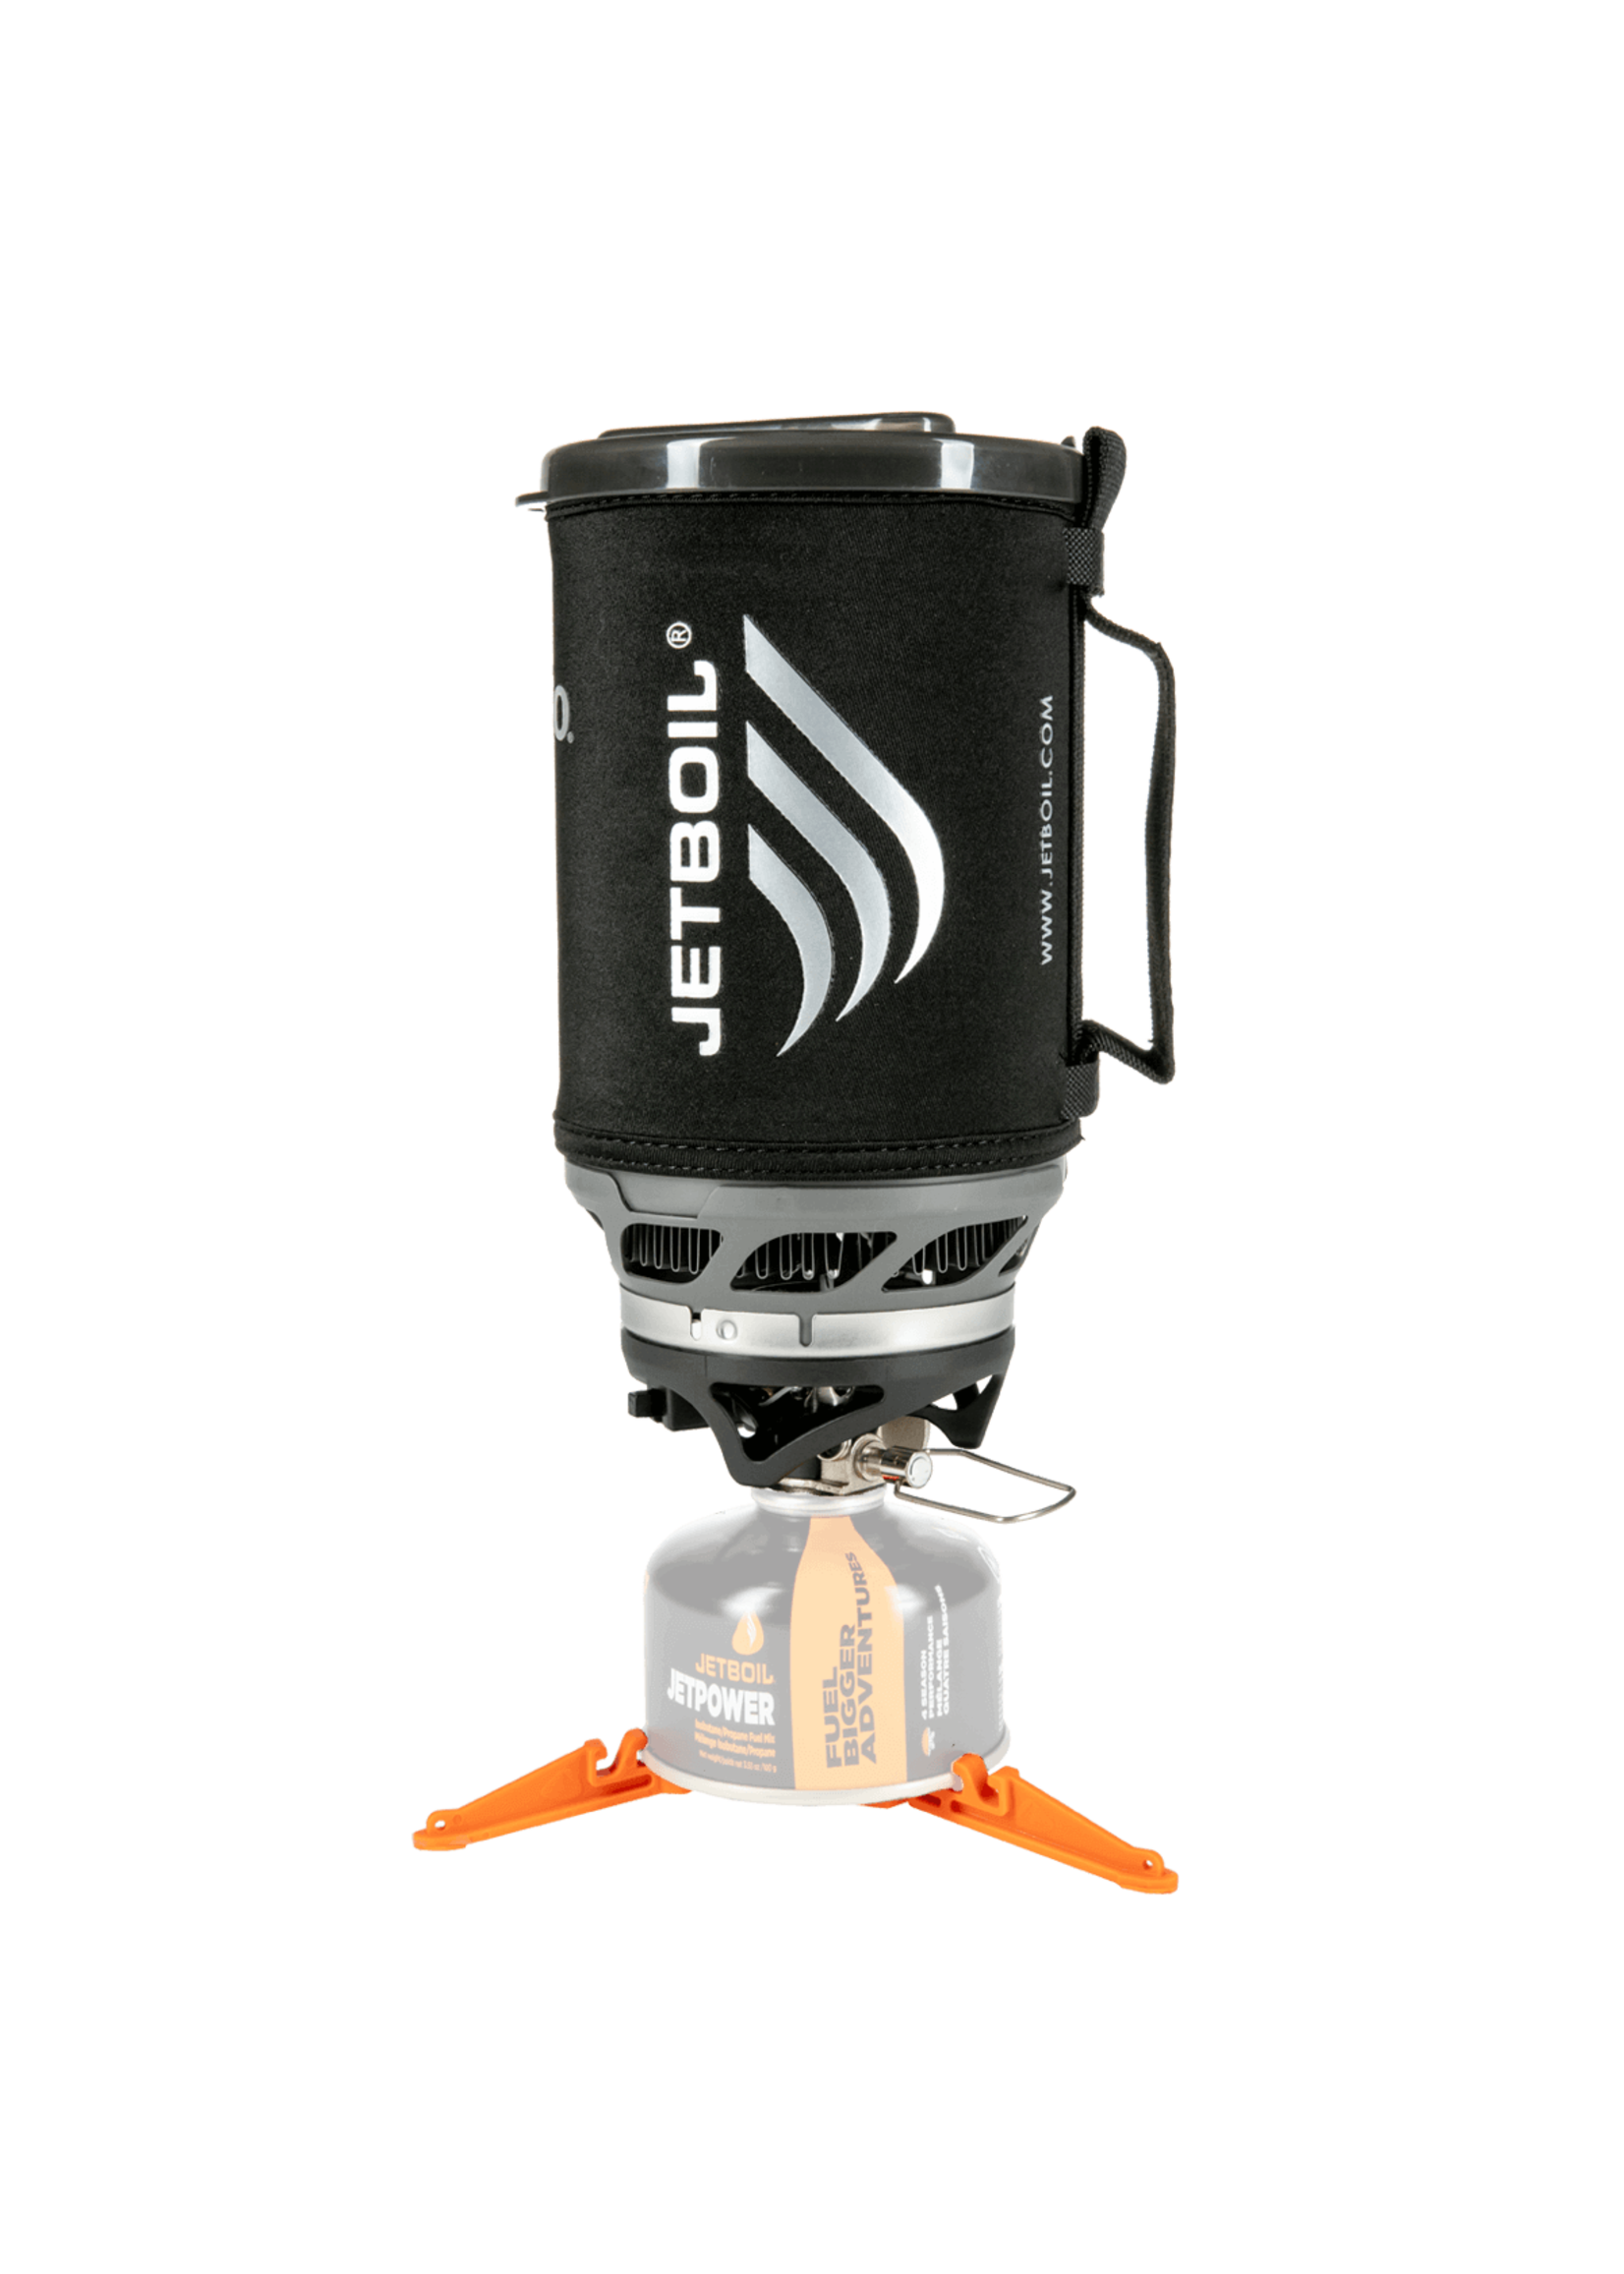 JetBoil SUMO Cooking System